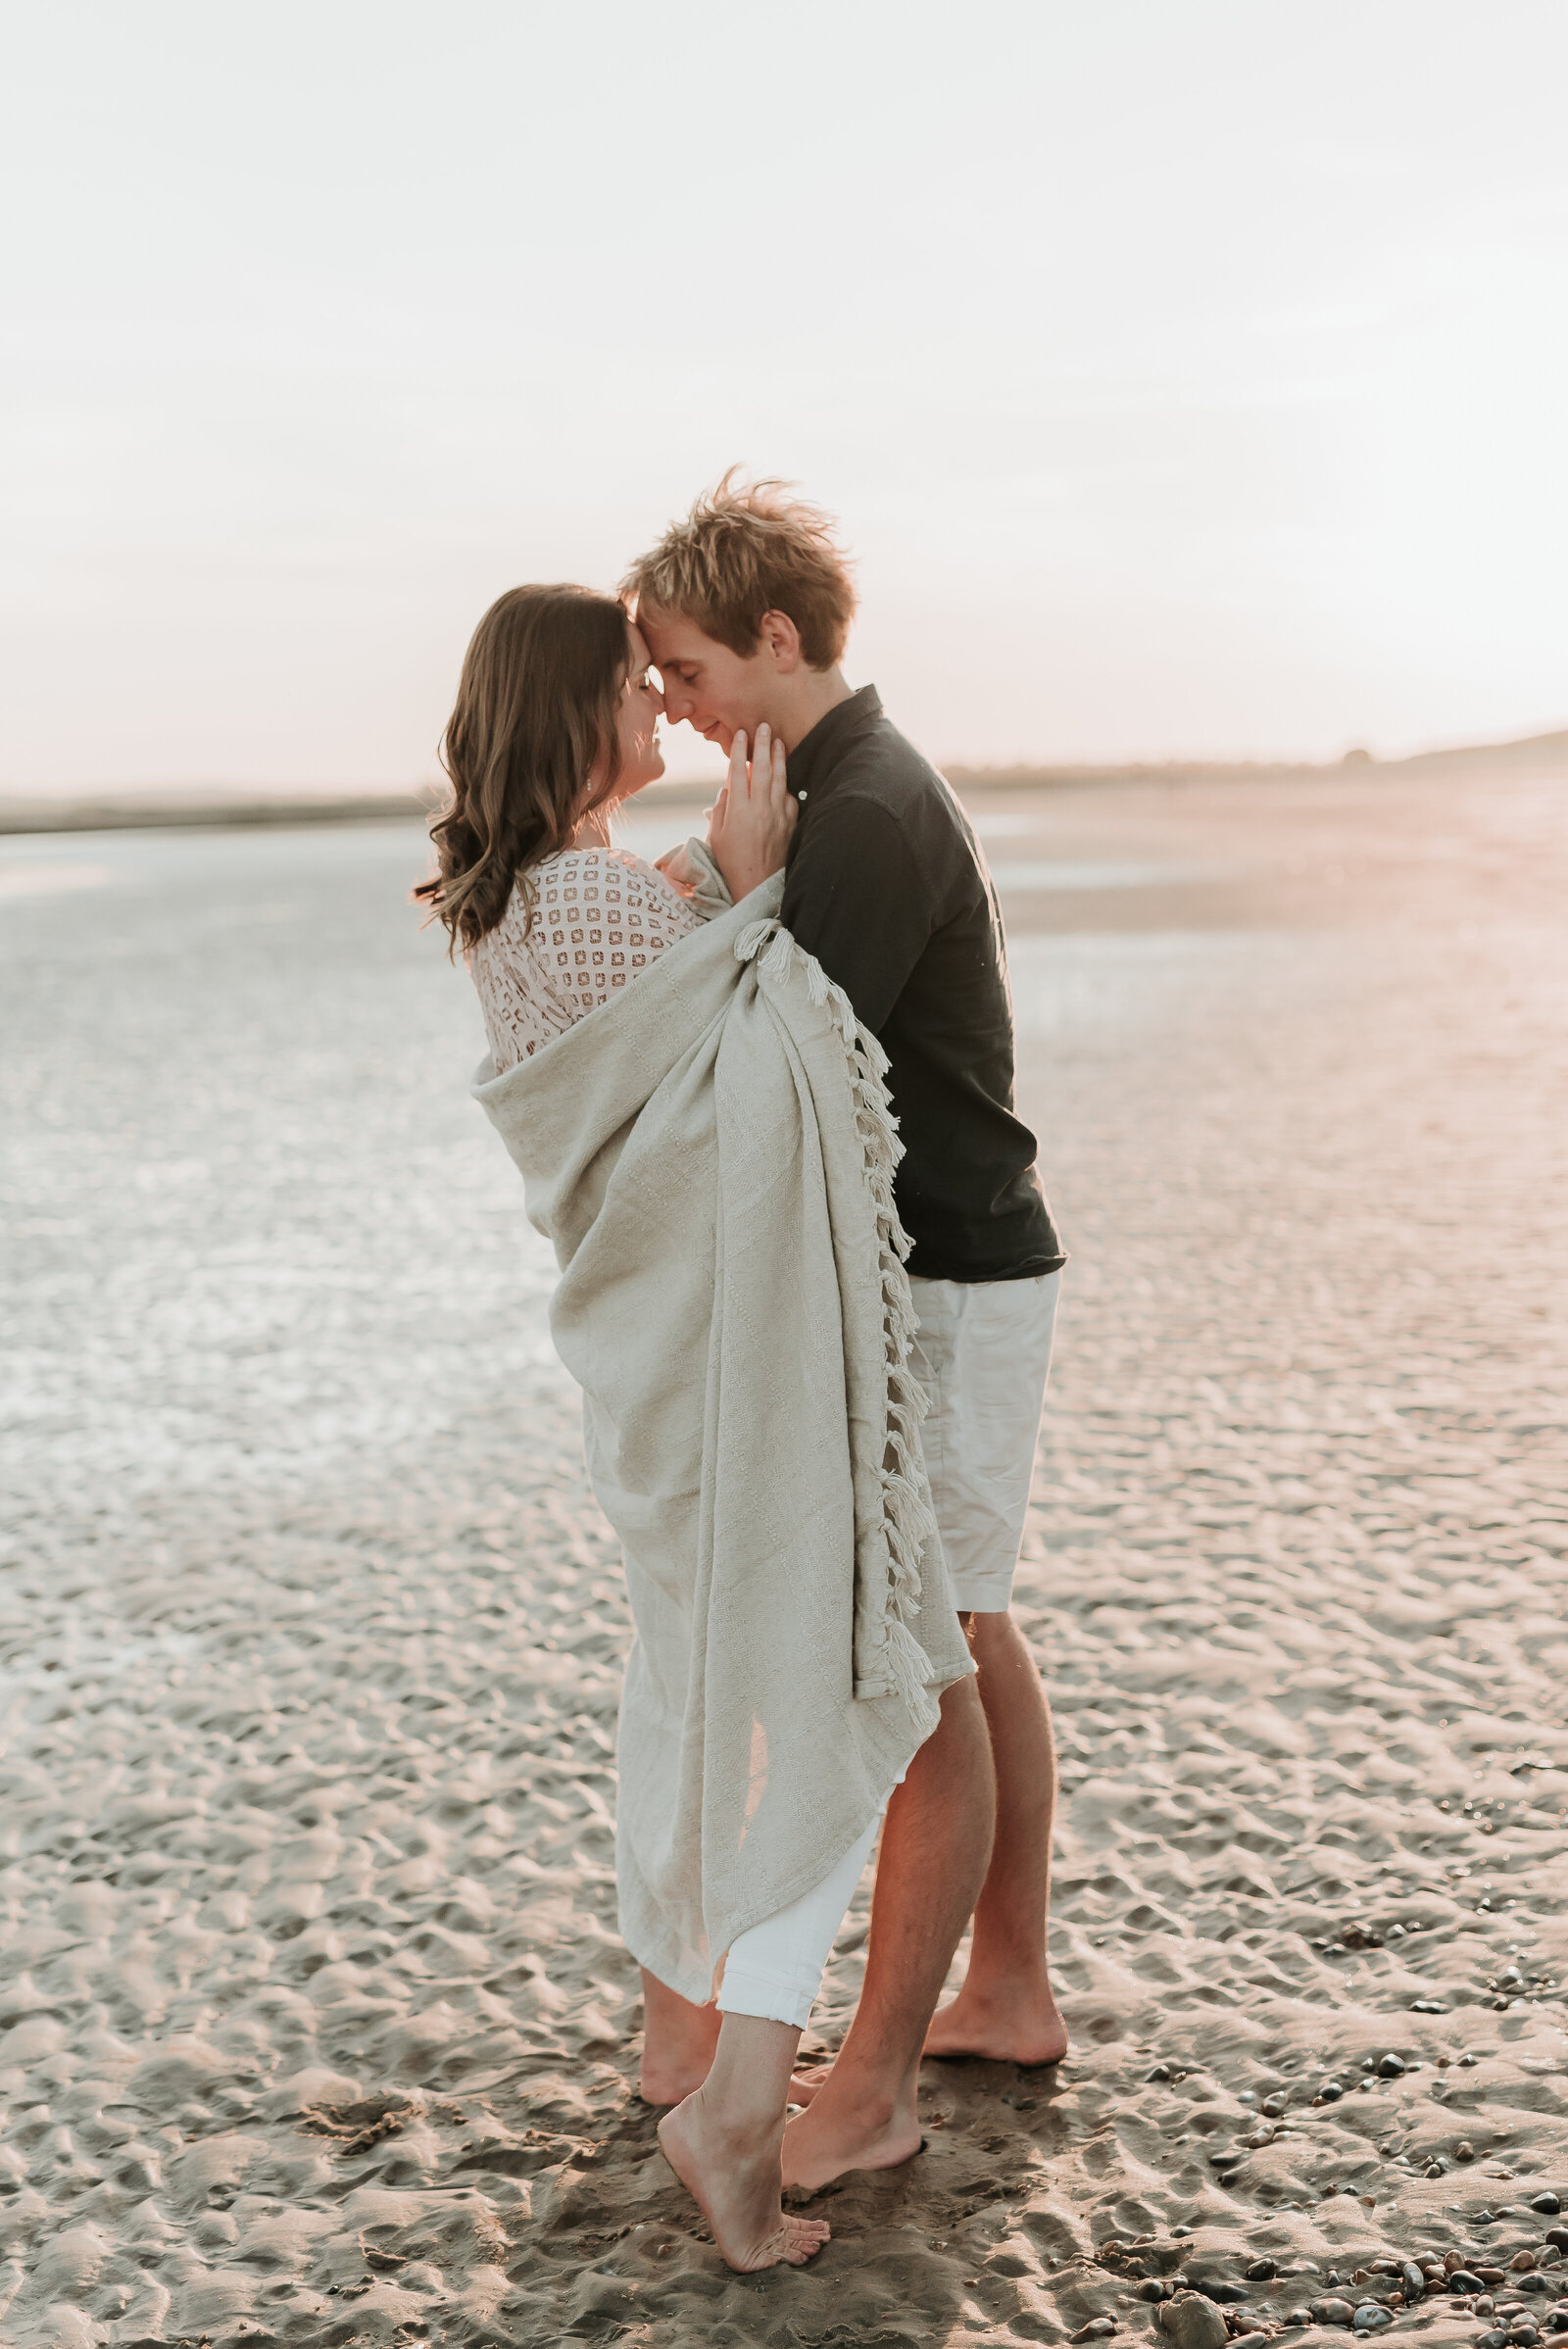 Man embraces his fiance in a cosy cream blanket on a sandy beach as the sun sets